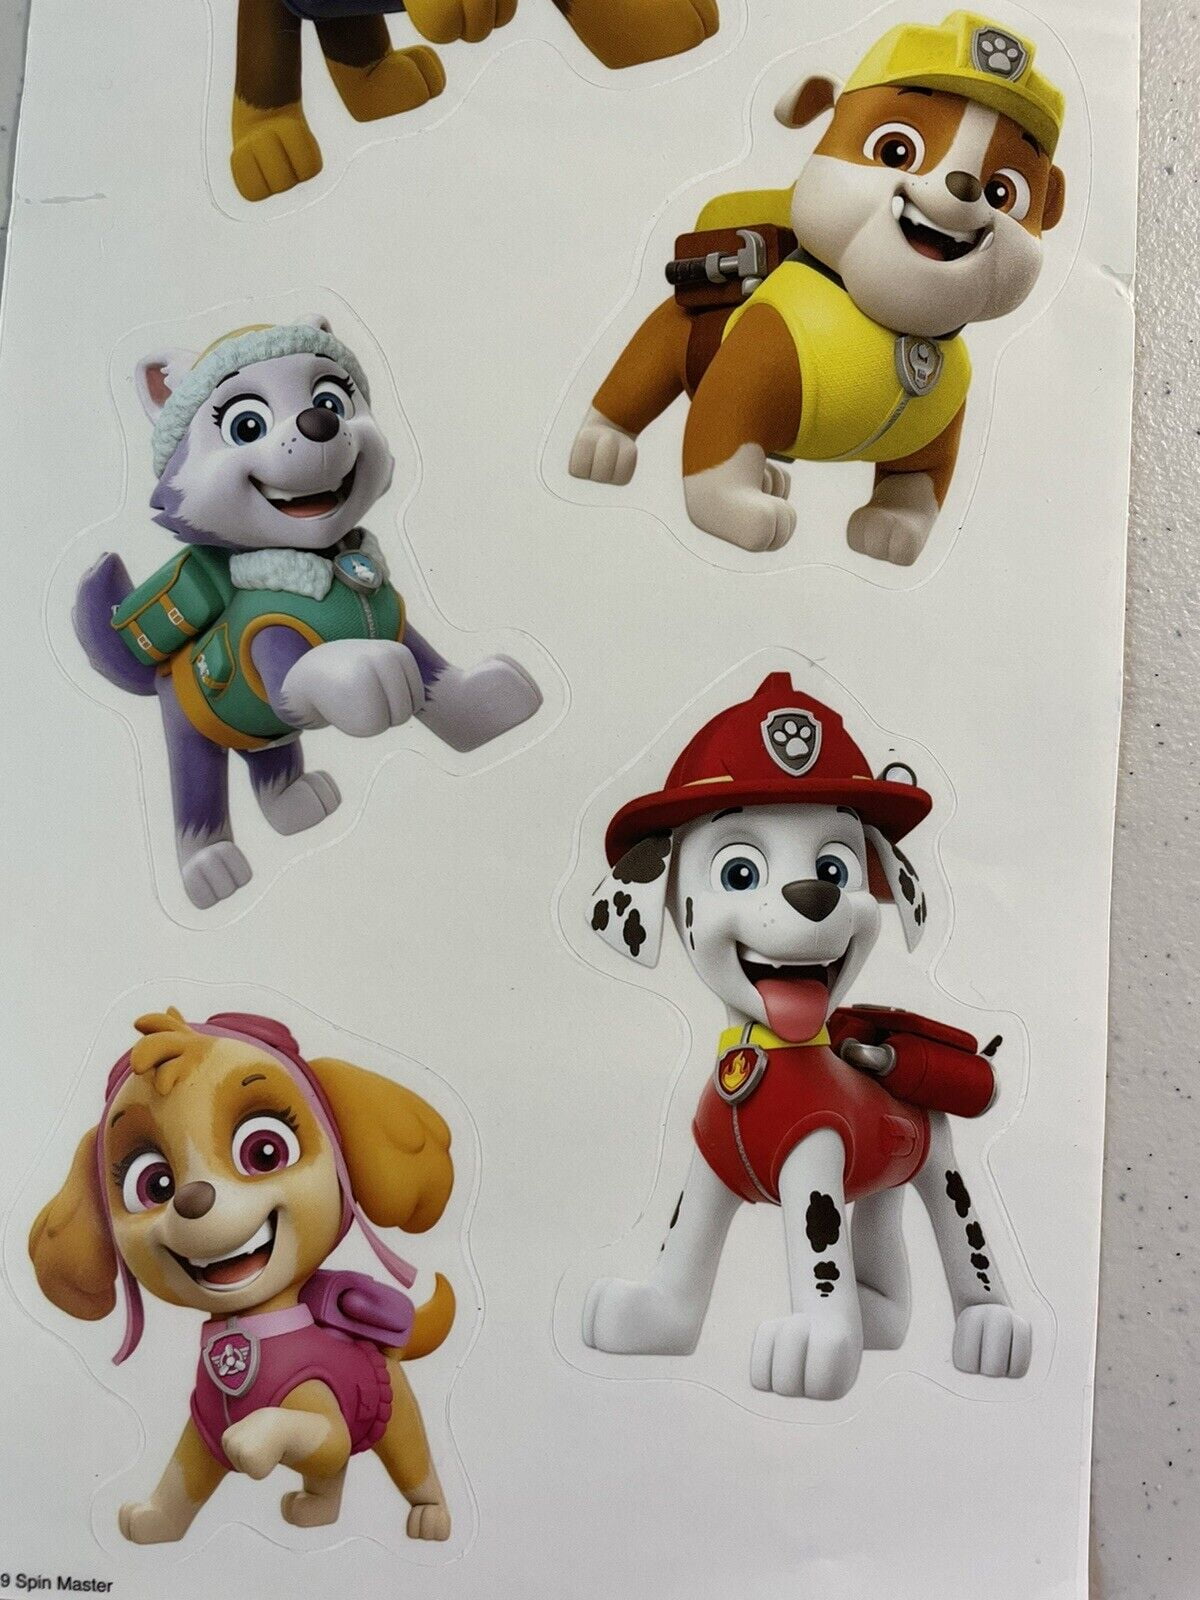 Pegatina for Sale con la obra «Patrulla Canina Ryder Chase Rubble Skye The  Mighty Halloween Christmas» de PawPatrolBDuong